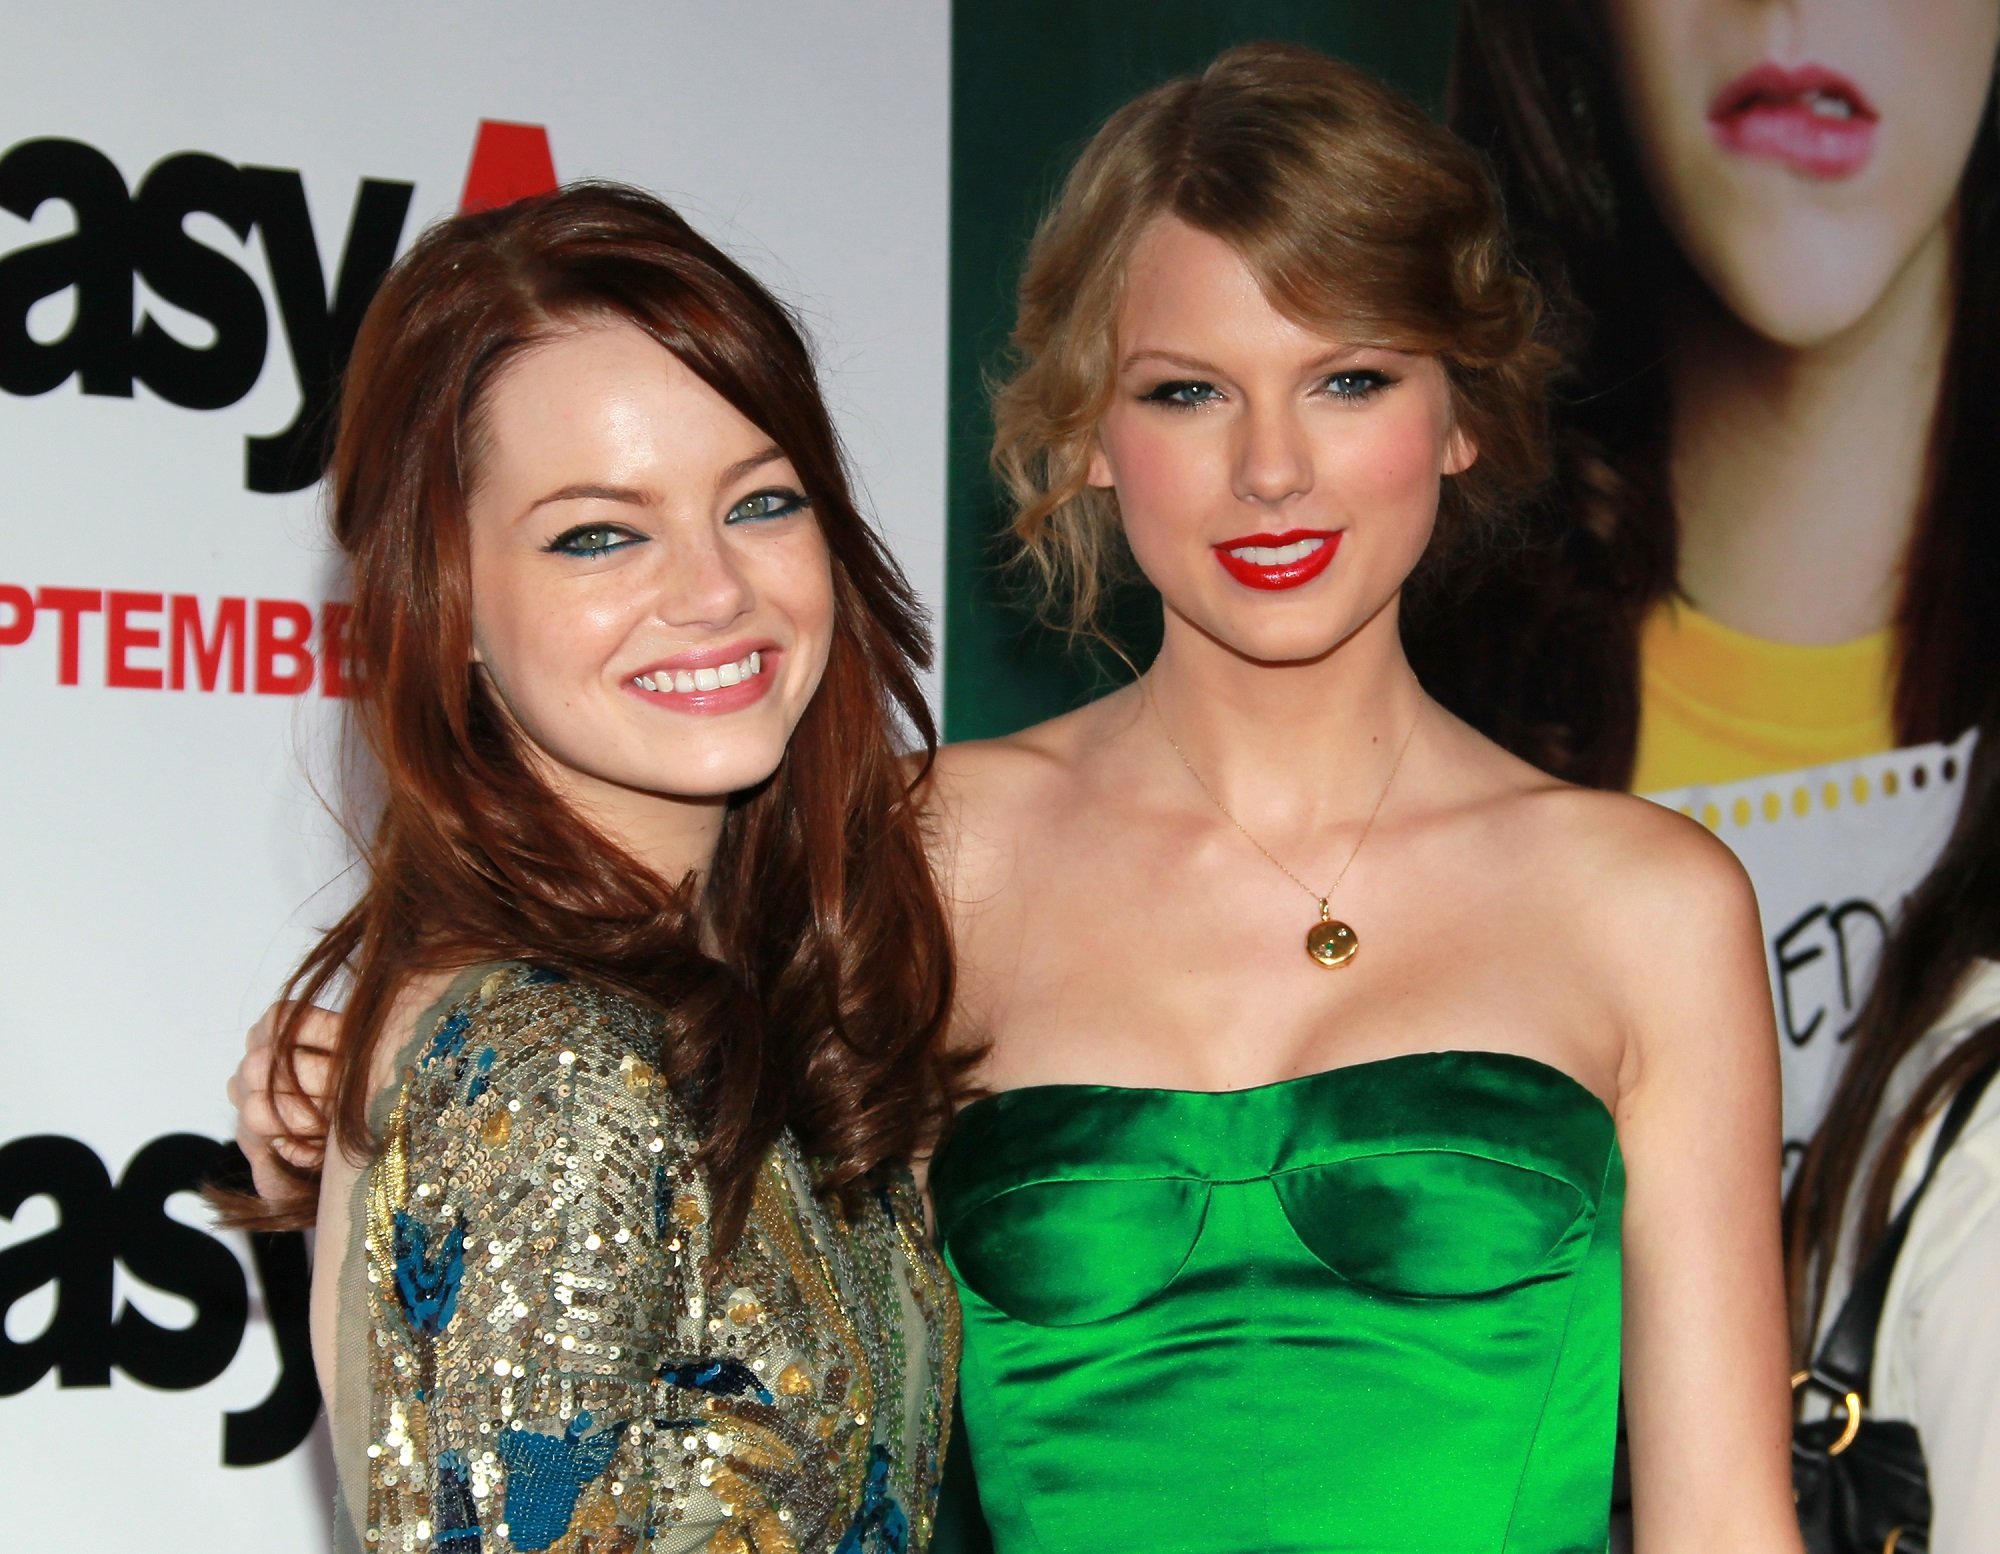 Emma Stone (L) and Taylor Swift attend the premiere of 'Easy A' on September 13, 2010, in Hollywood, California.